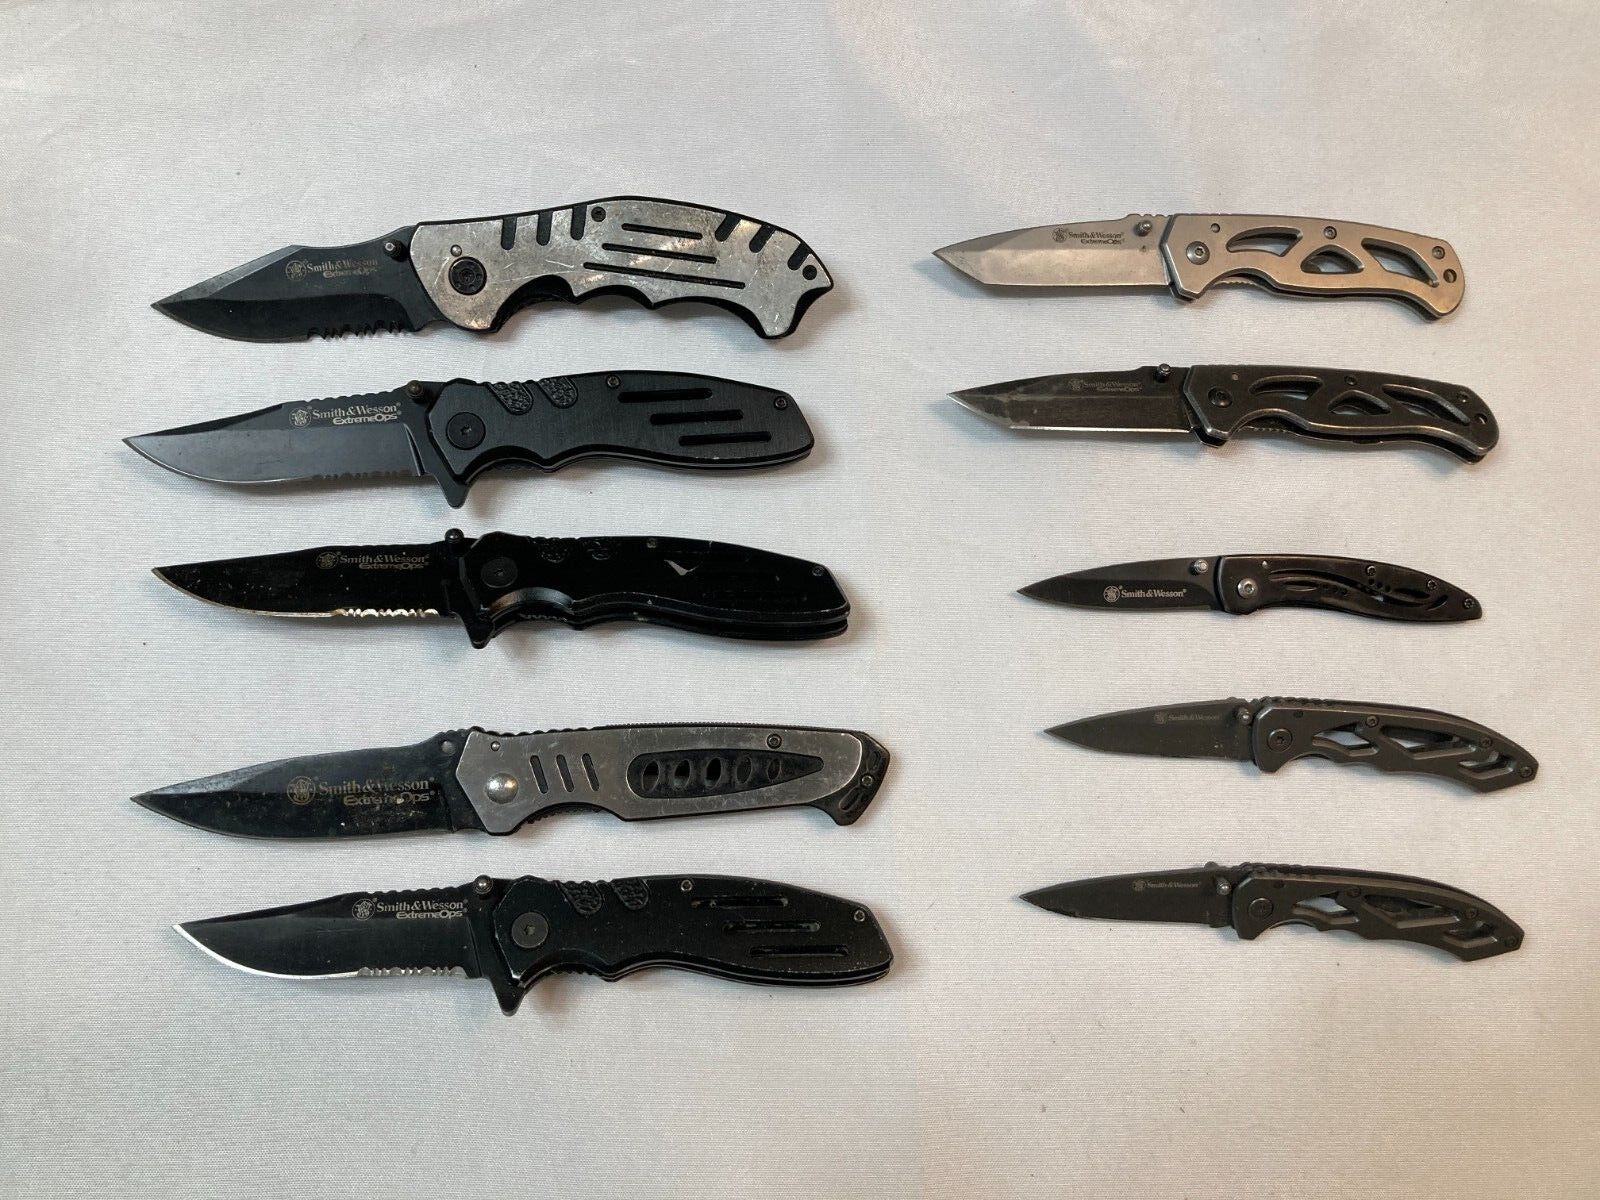 Lot of 10 Smith & Wesson knives (A)